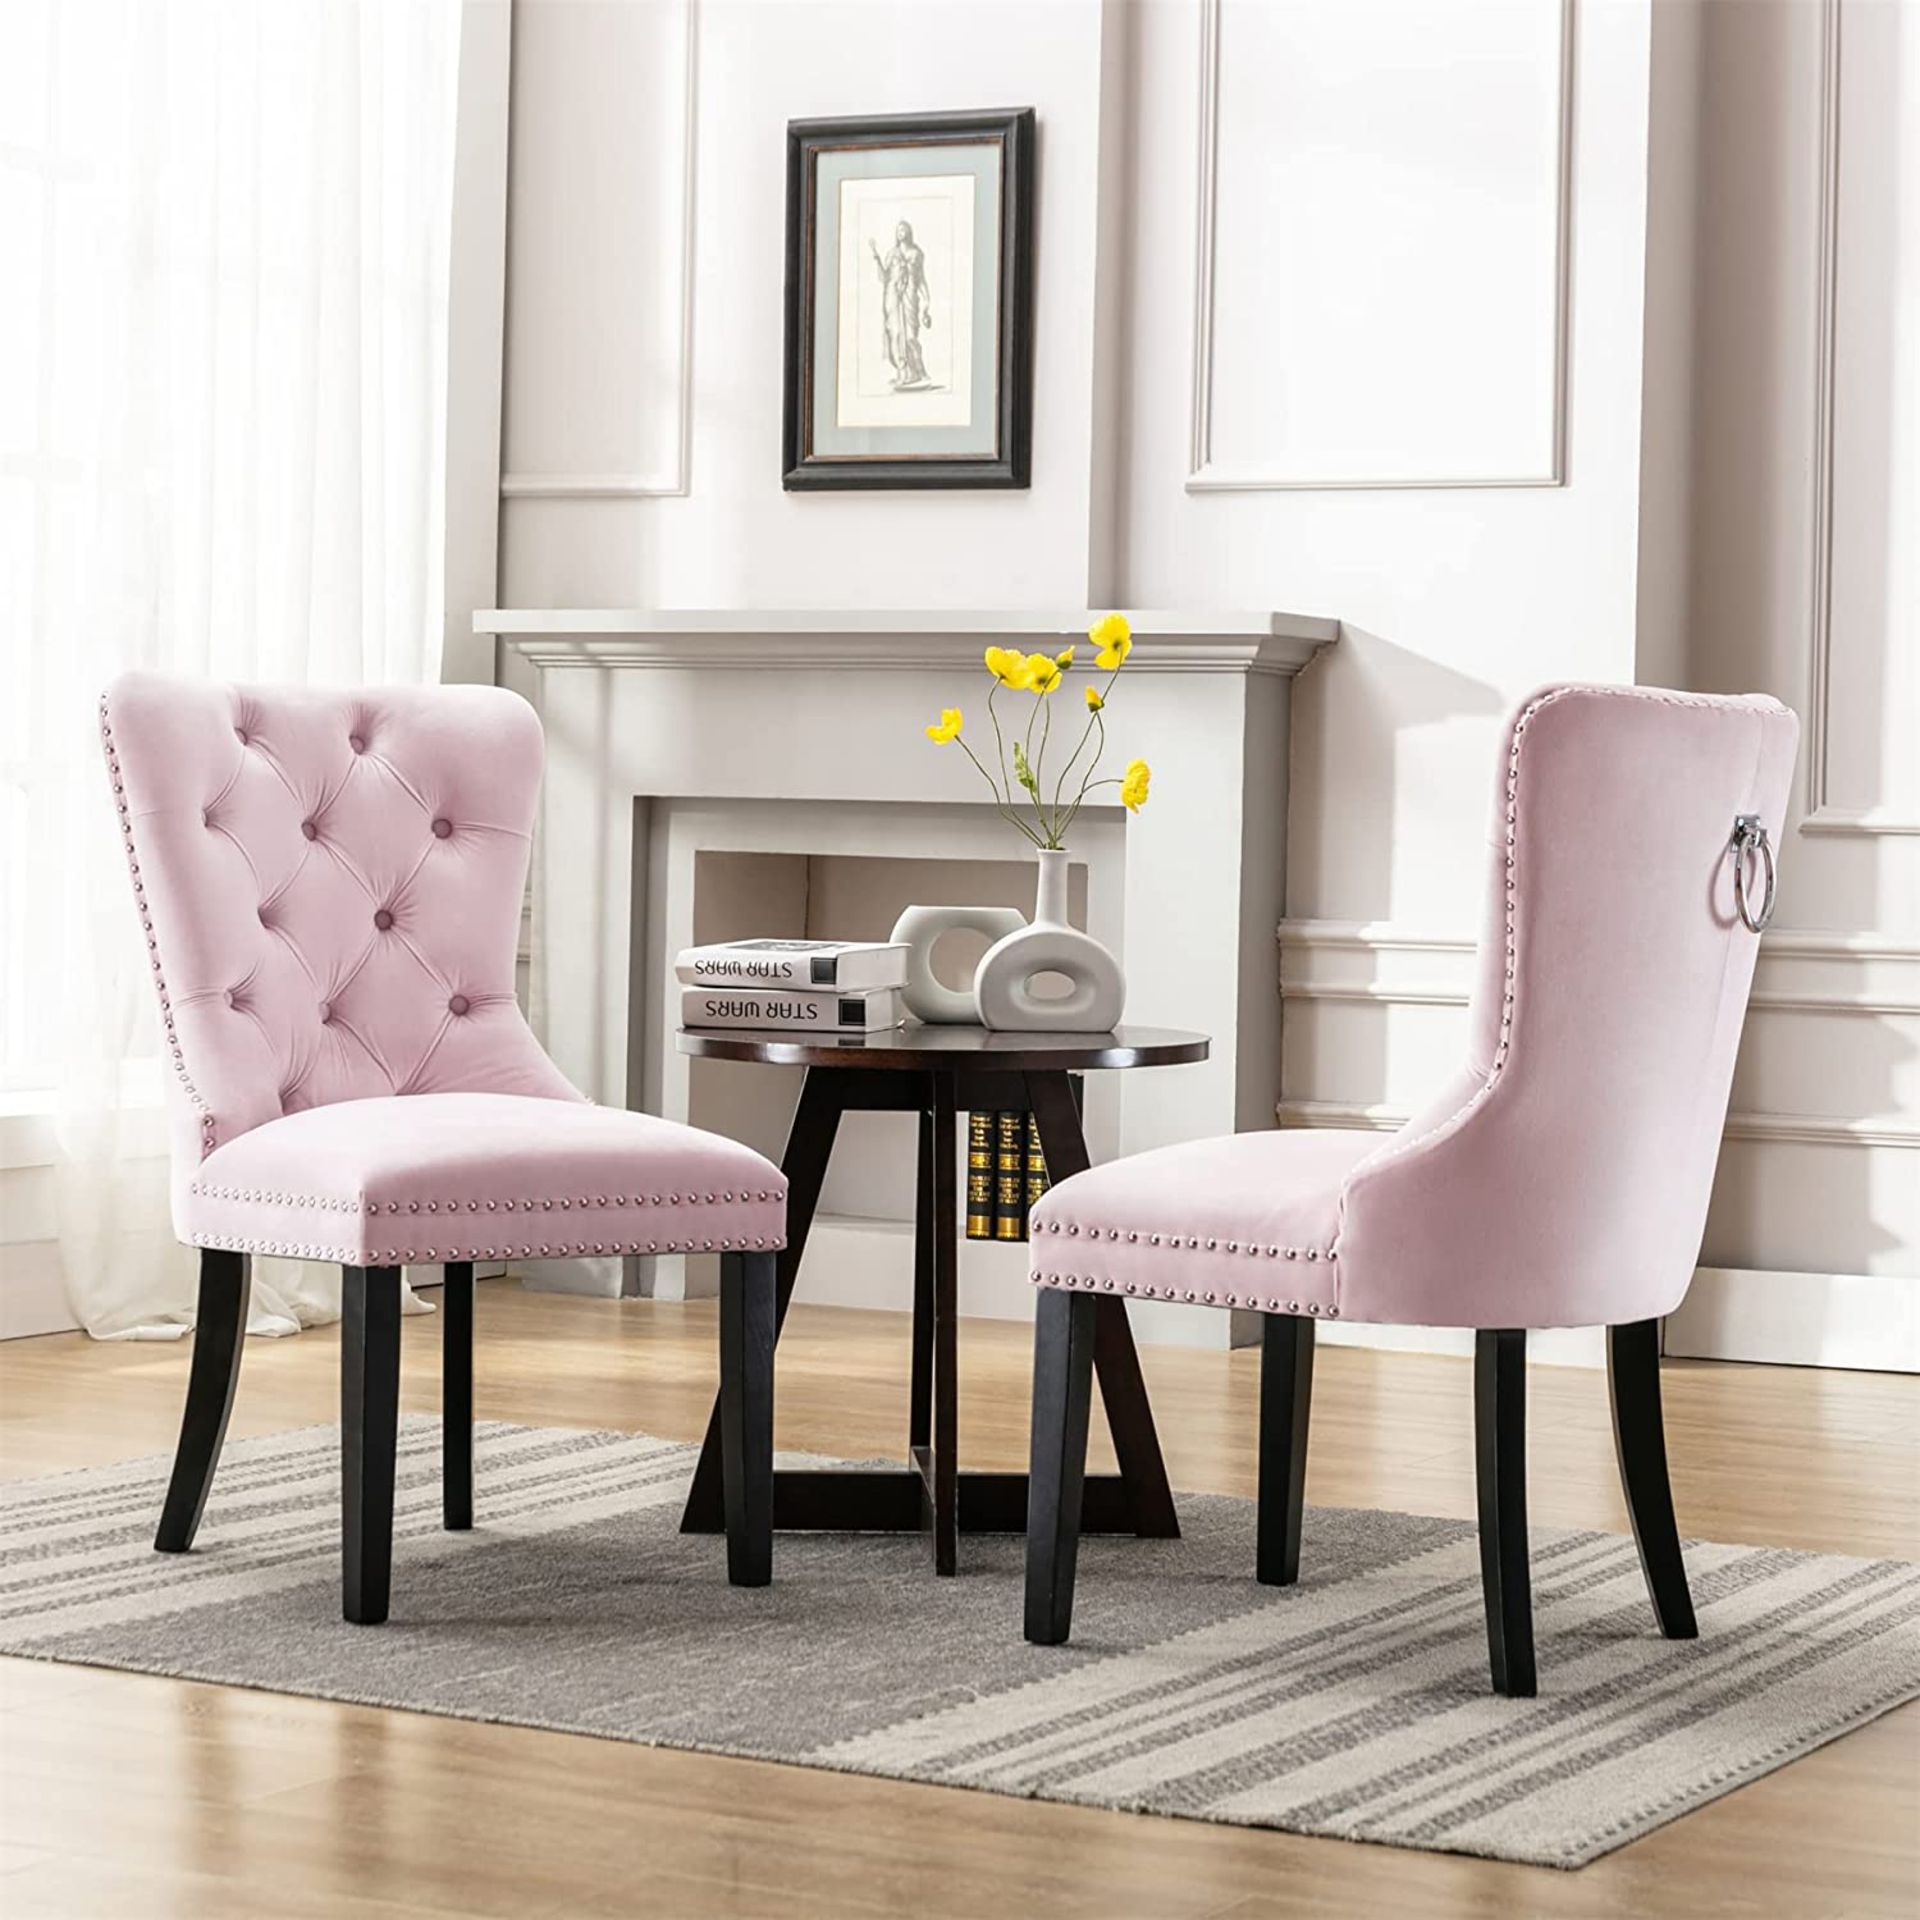 NEW Velvet Dining Chairs Set of 2, Mid-Century Modern Tufted Button Studded Wingback Dining Room